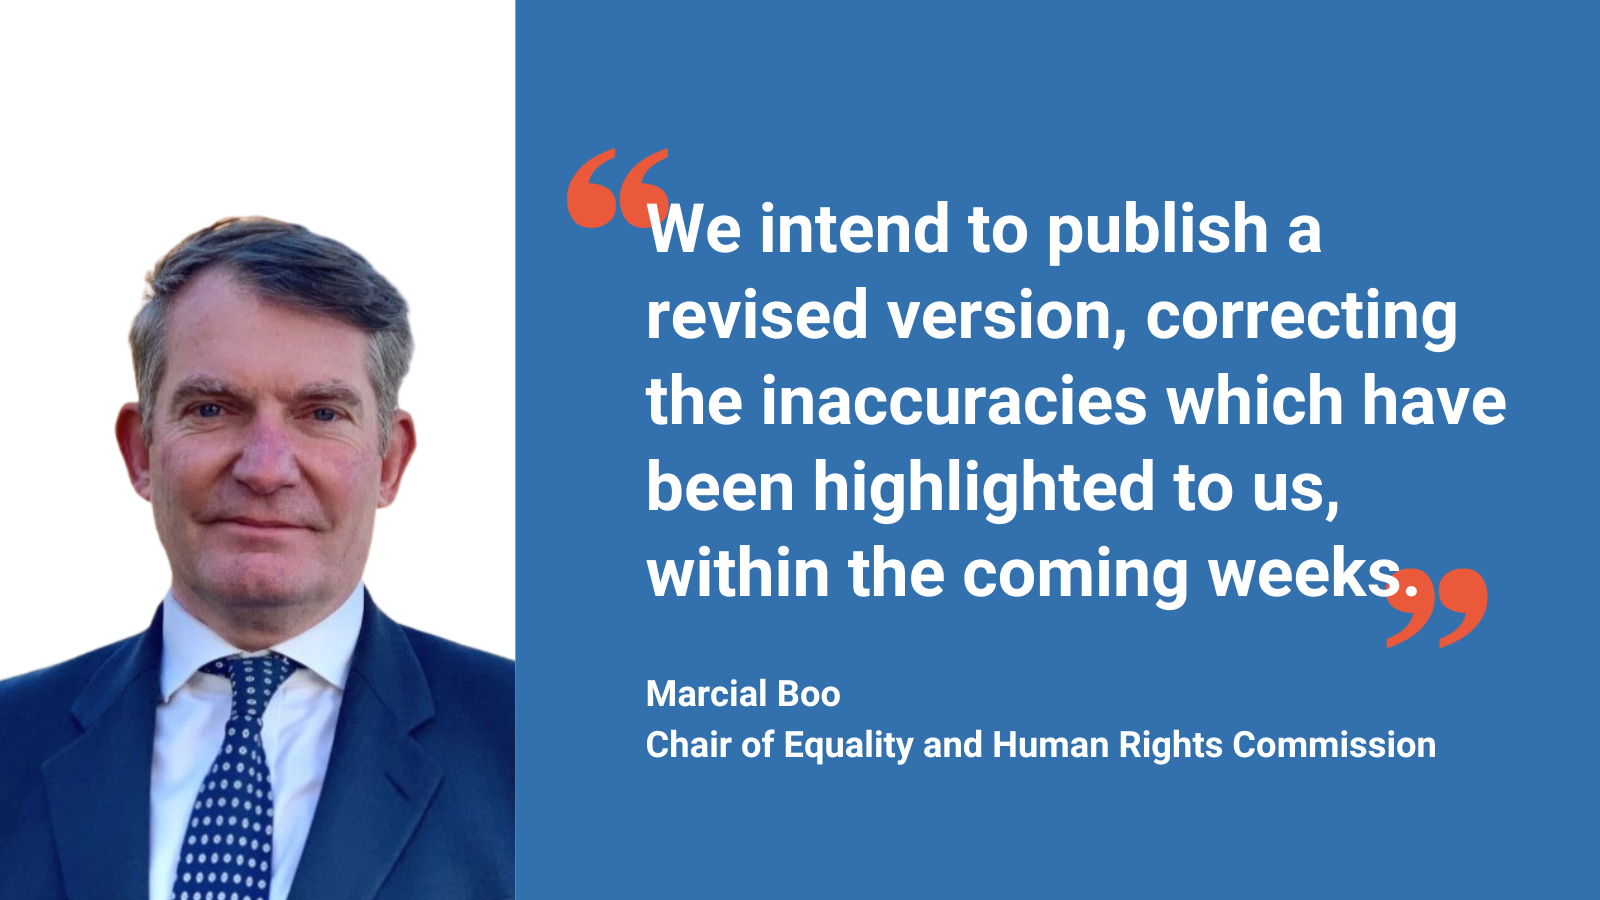 "We intend to publish a revised version, correcting the inaccuracies which have been highlighted to us, within the coming weeks." – Marcial Boo, Chair of Equality and Human Rights Commission